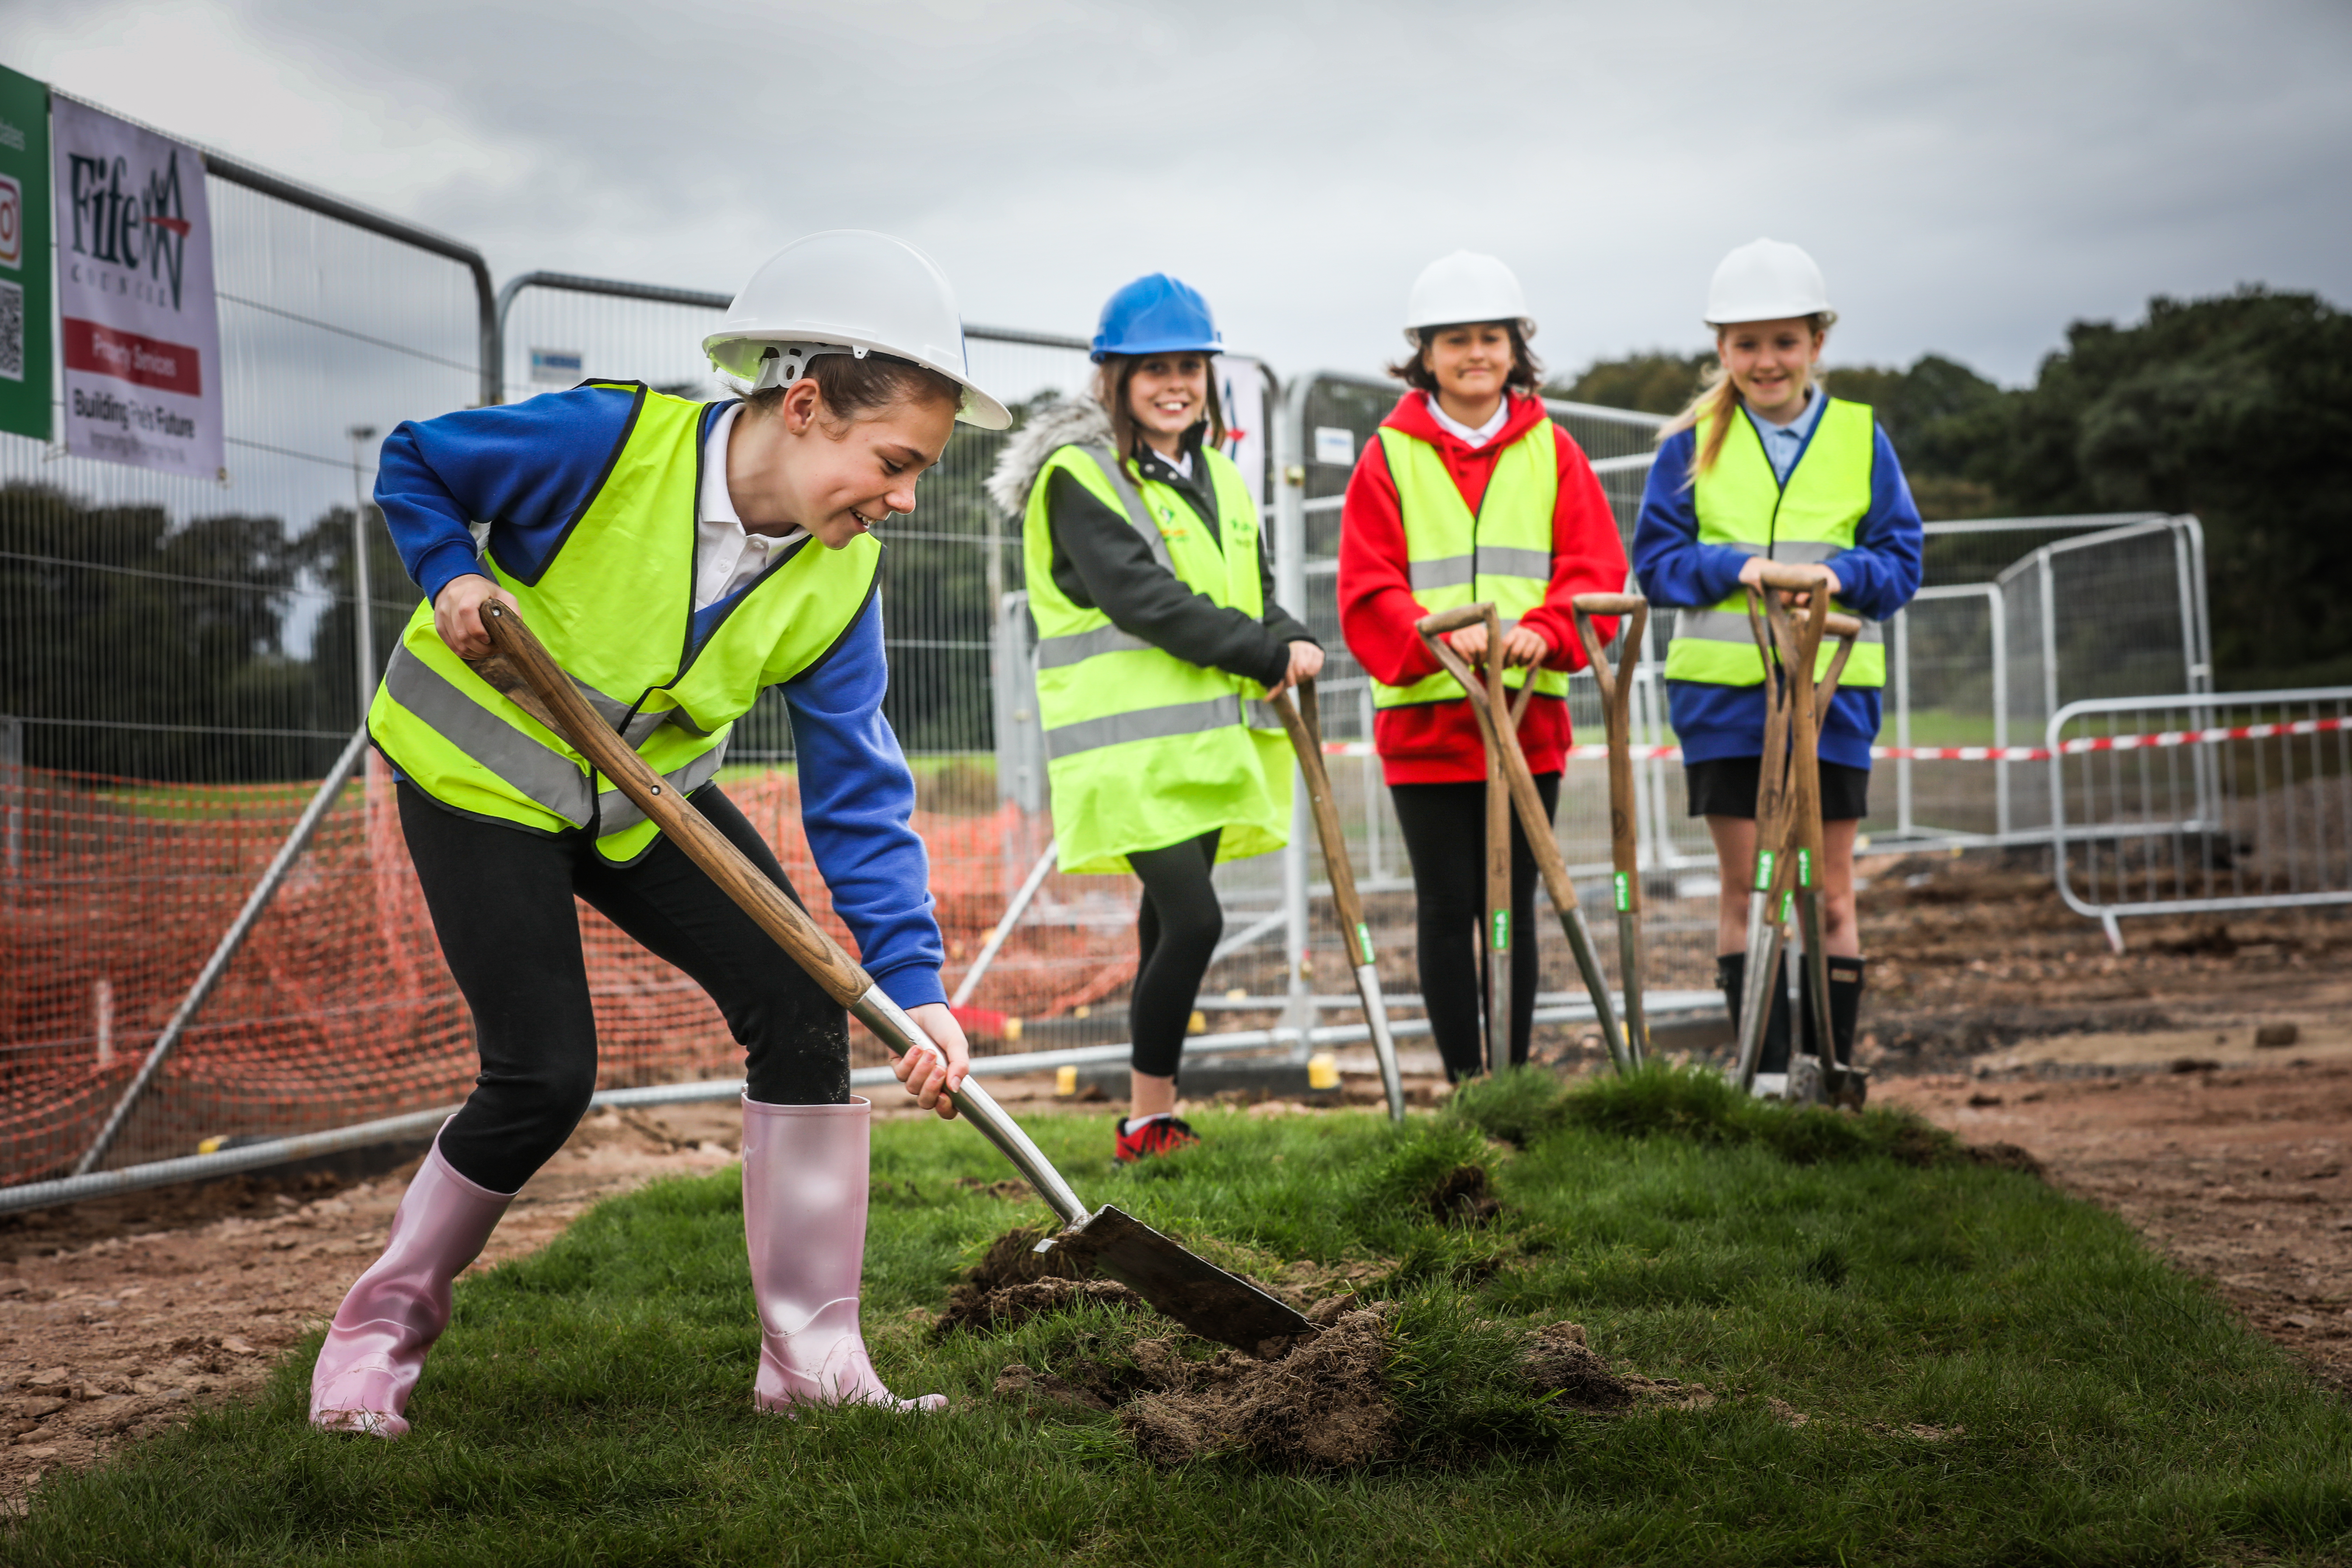 The ground was broken at the new site in September